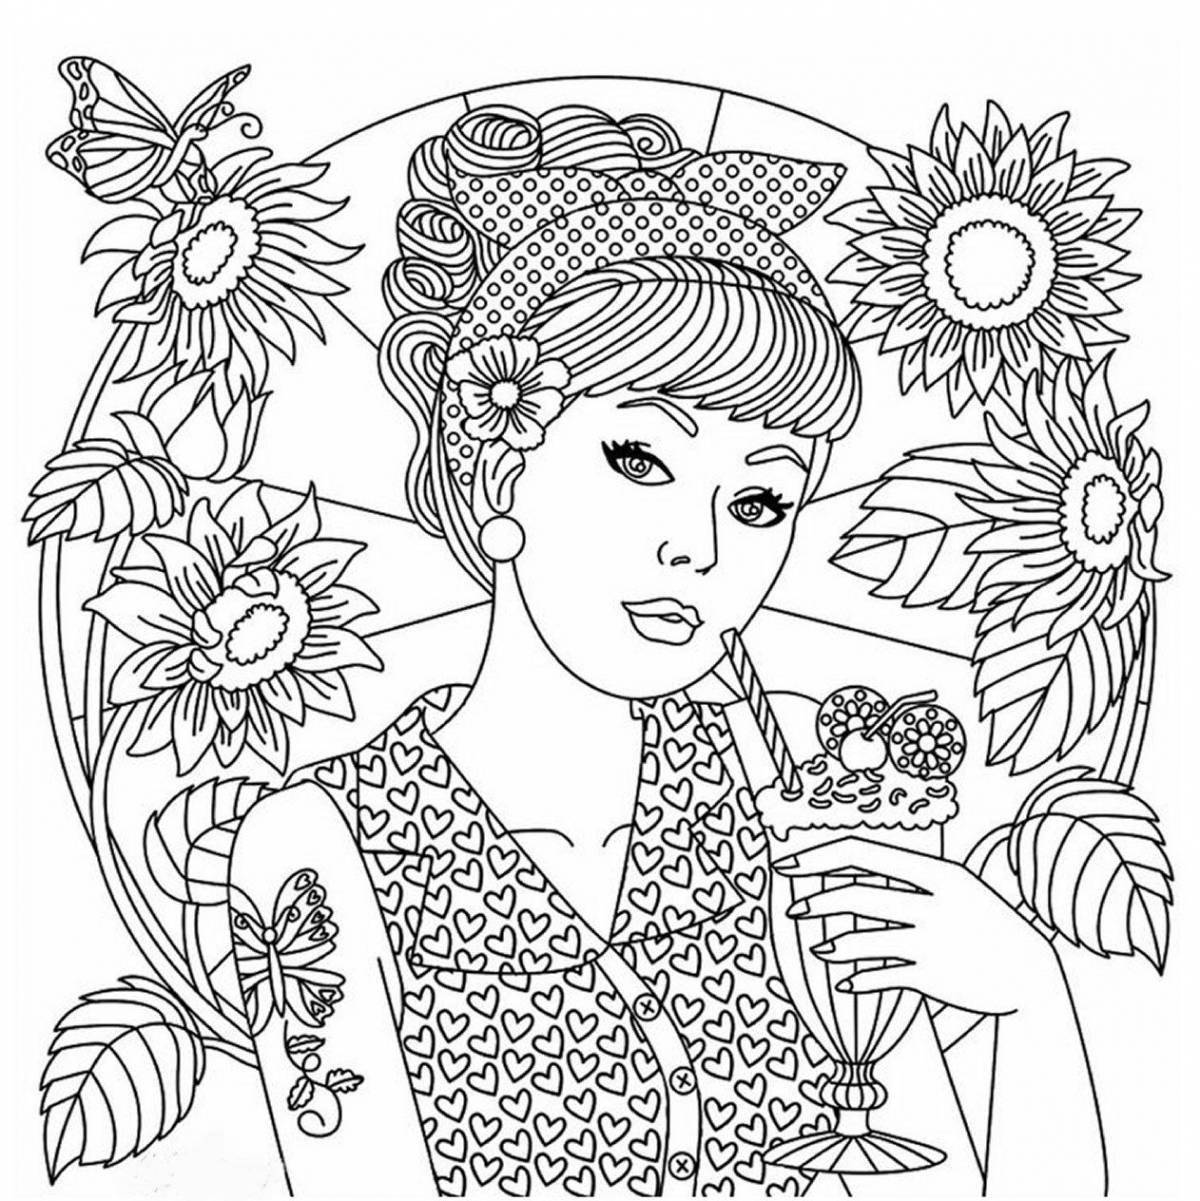 Coloring book bright anti-stress people